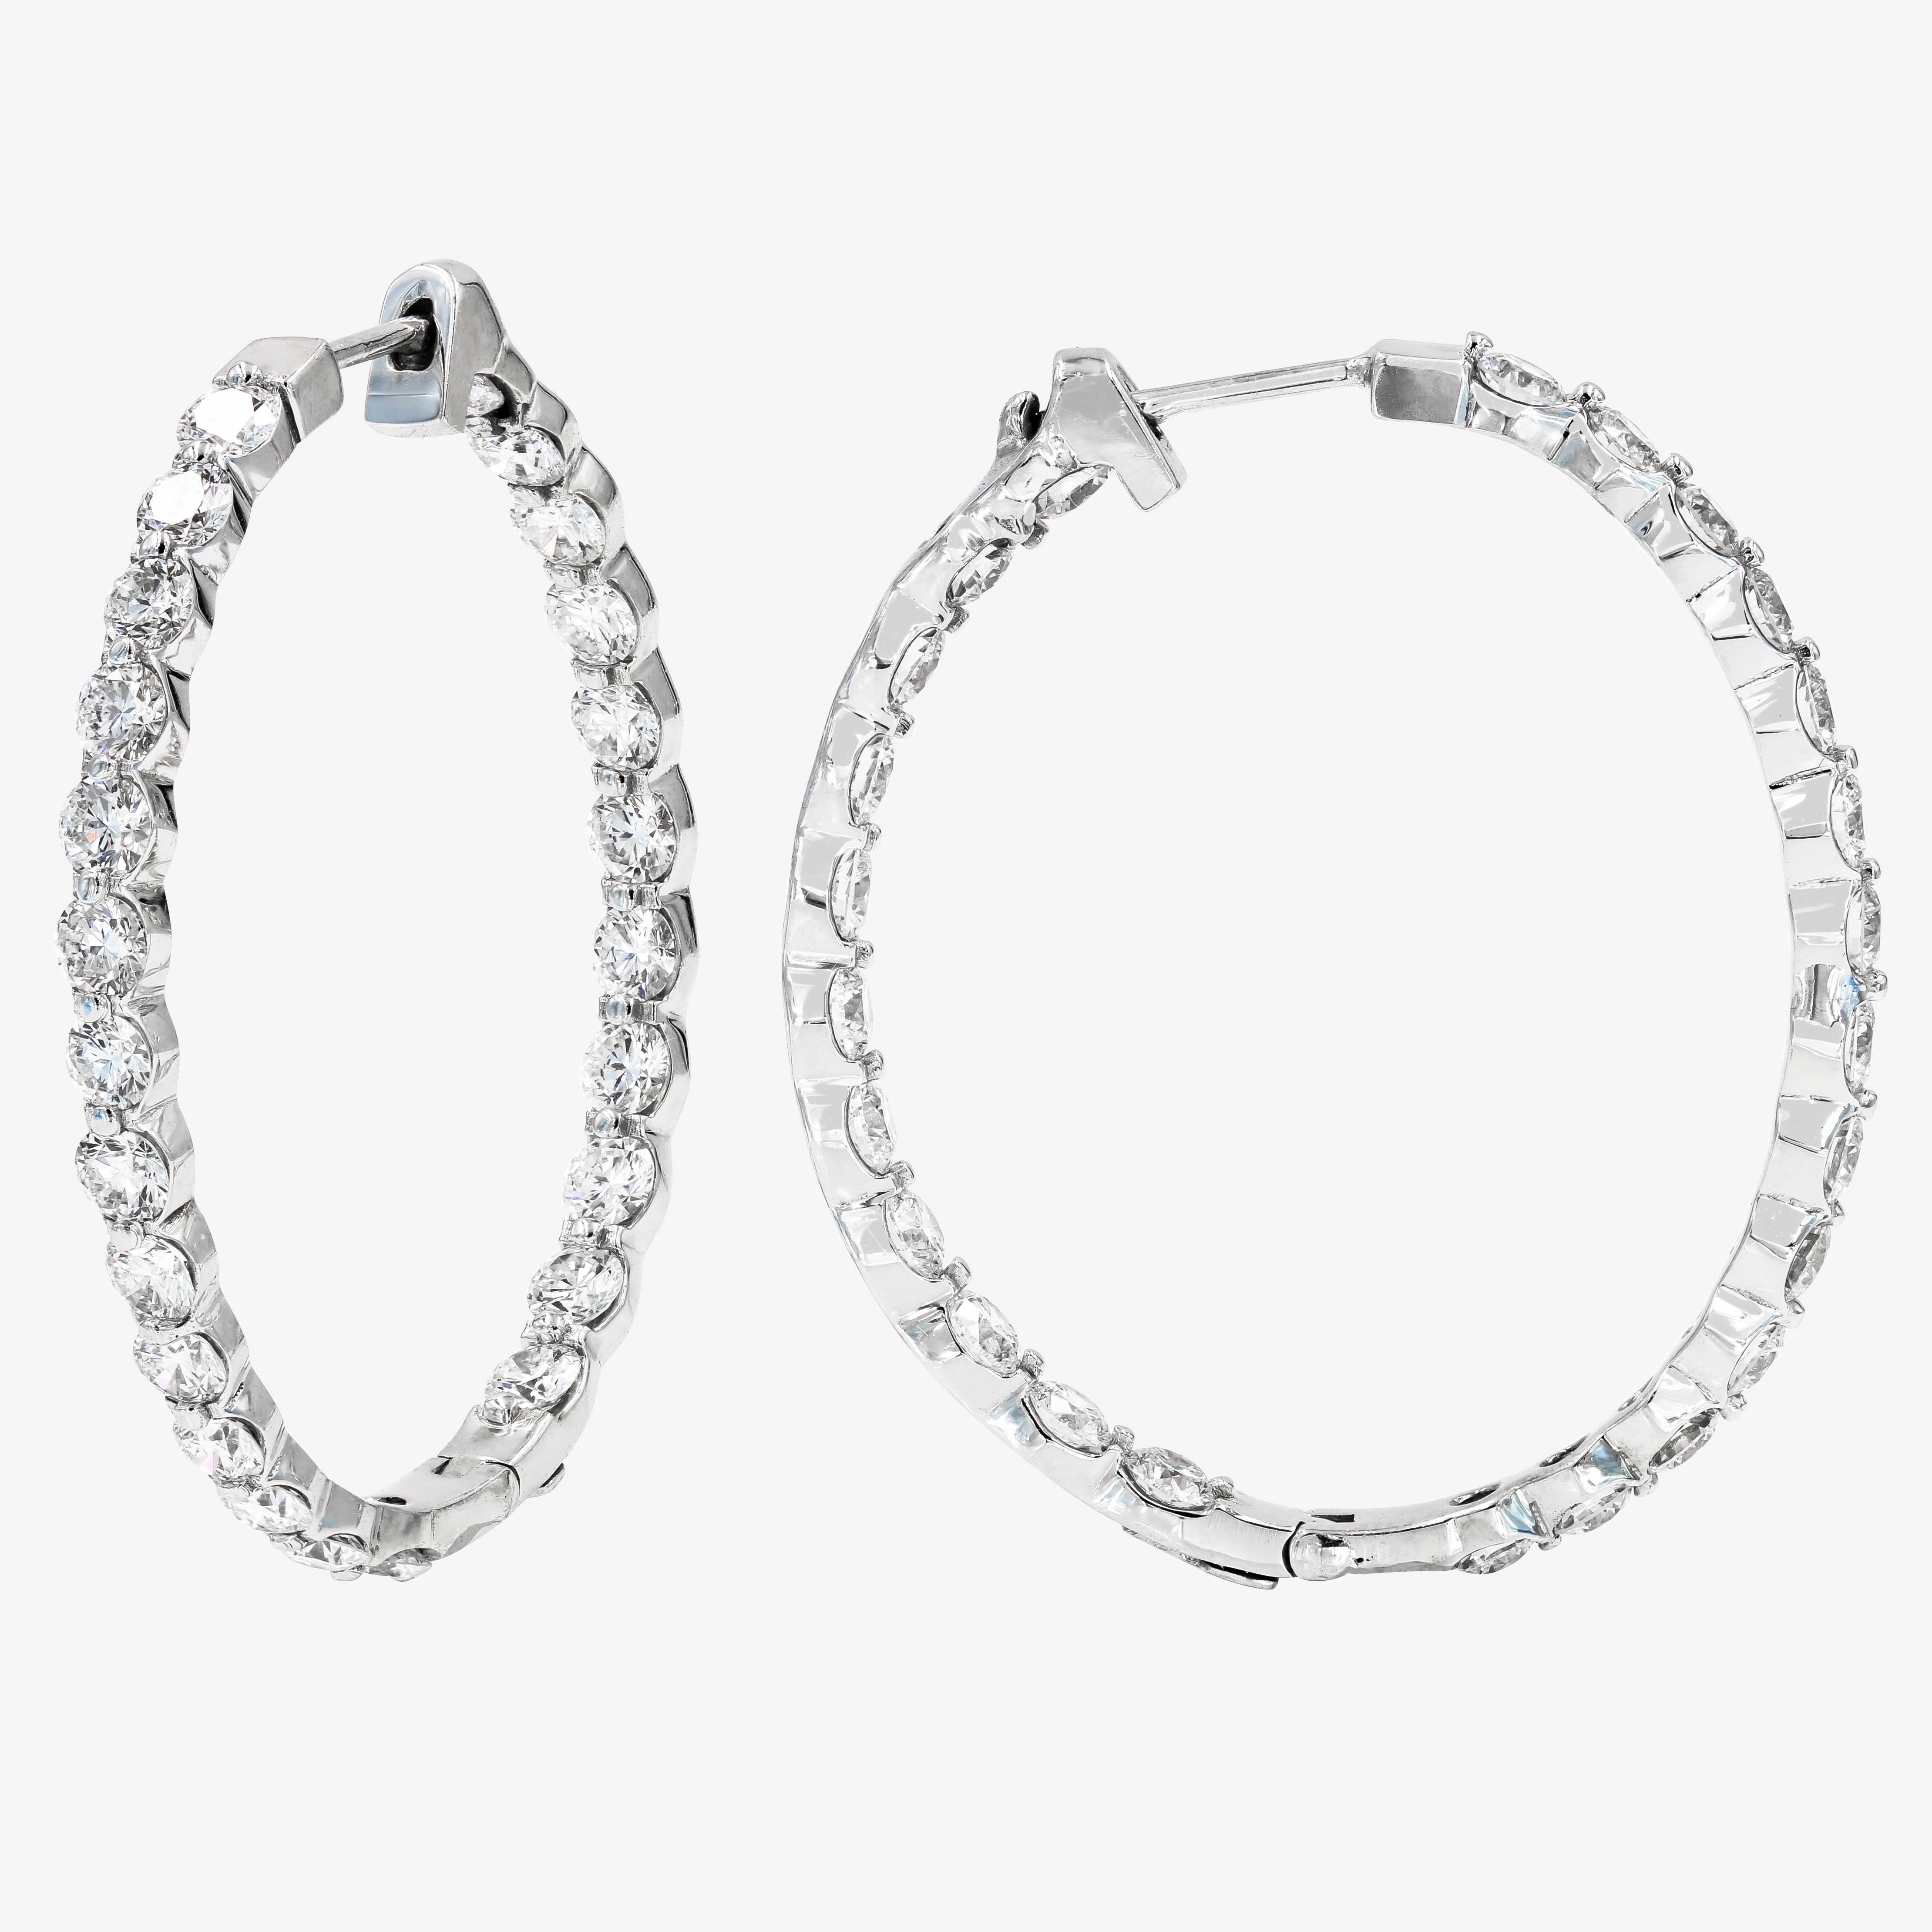 Contemporary Large Diamond Hoop Earrings with Round Ideal Cut Diamonds in 18 Karat White Gold